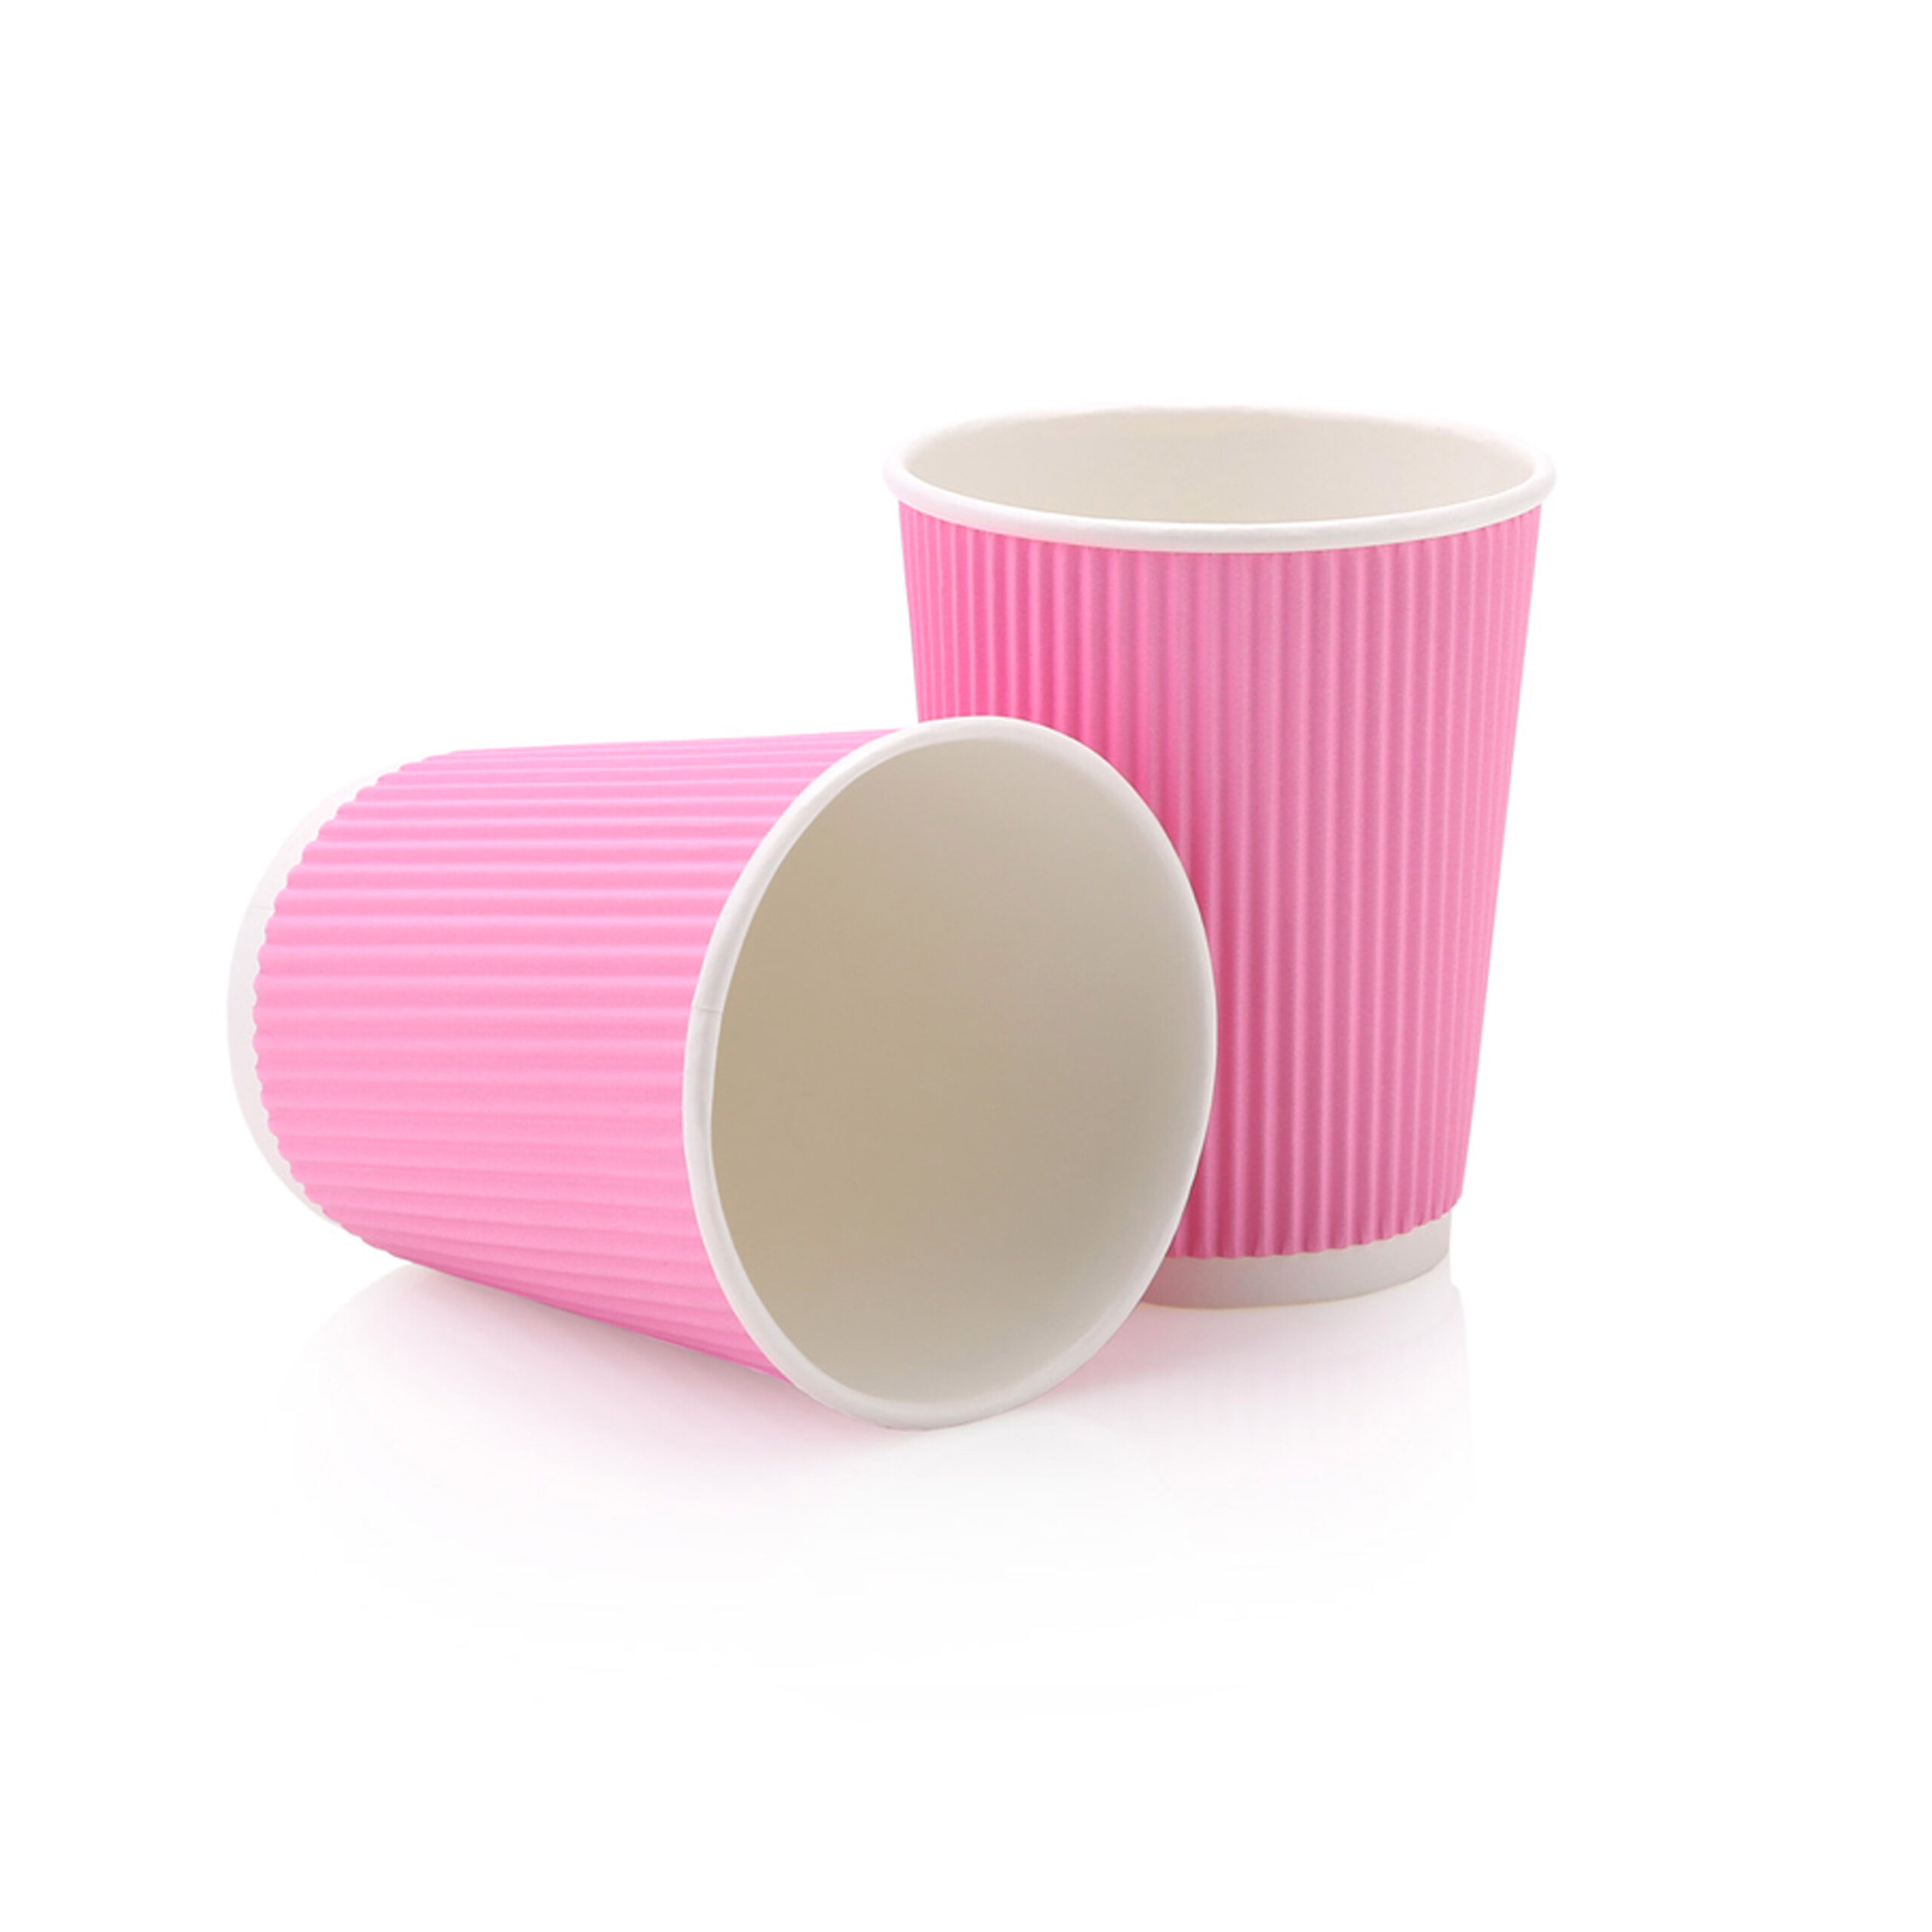 VERTICAL RIPPLE
PINK CUP 250ml
(1x25)